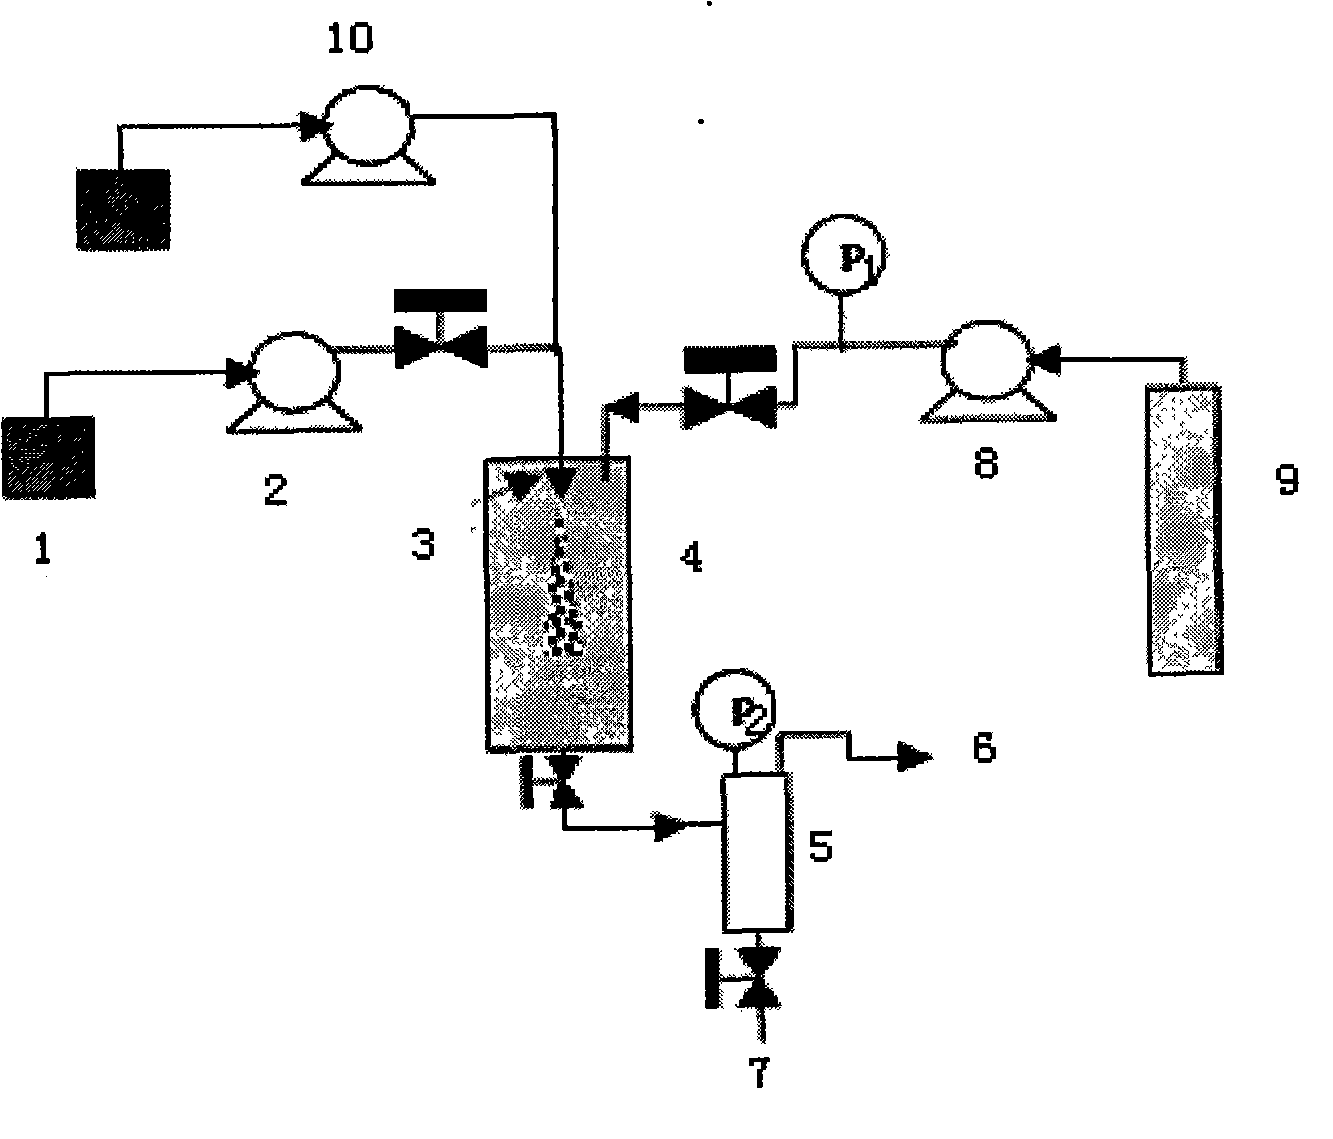 Process for preparing fluticasone diproprionate superfine particles and product thereof